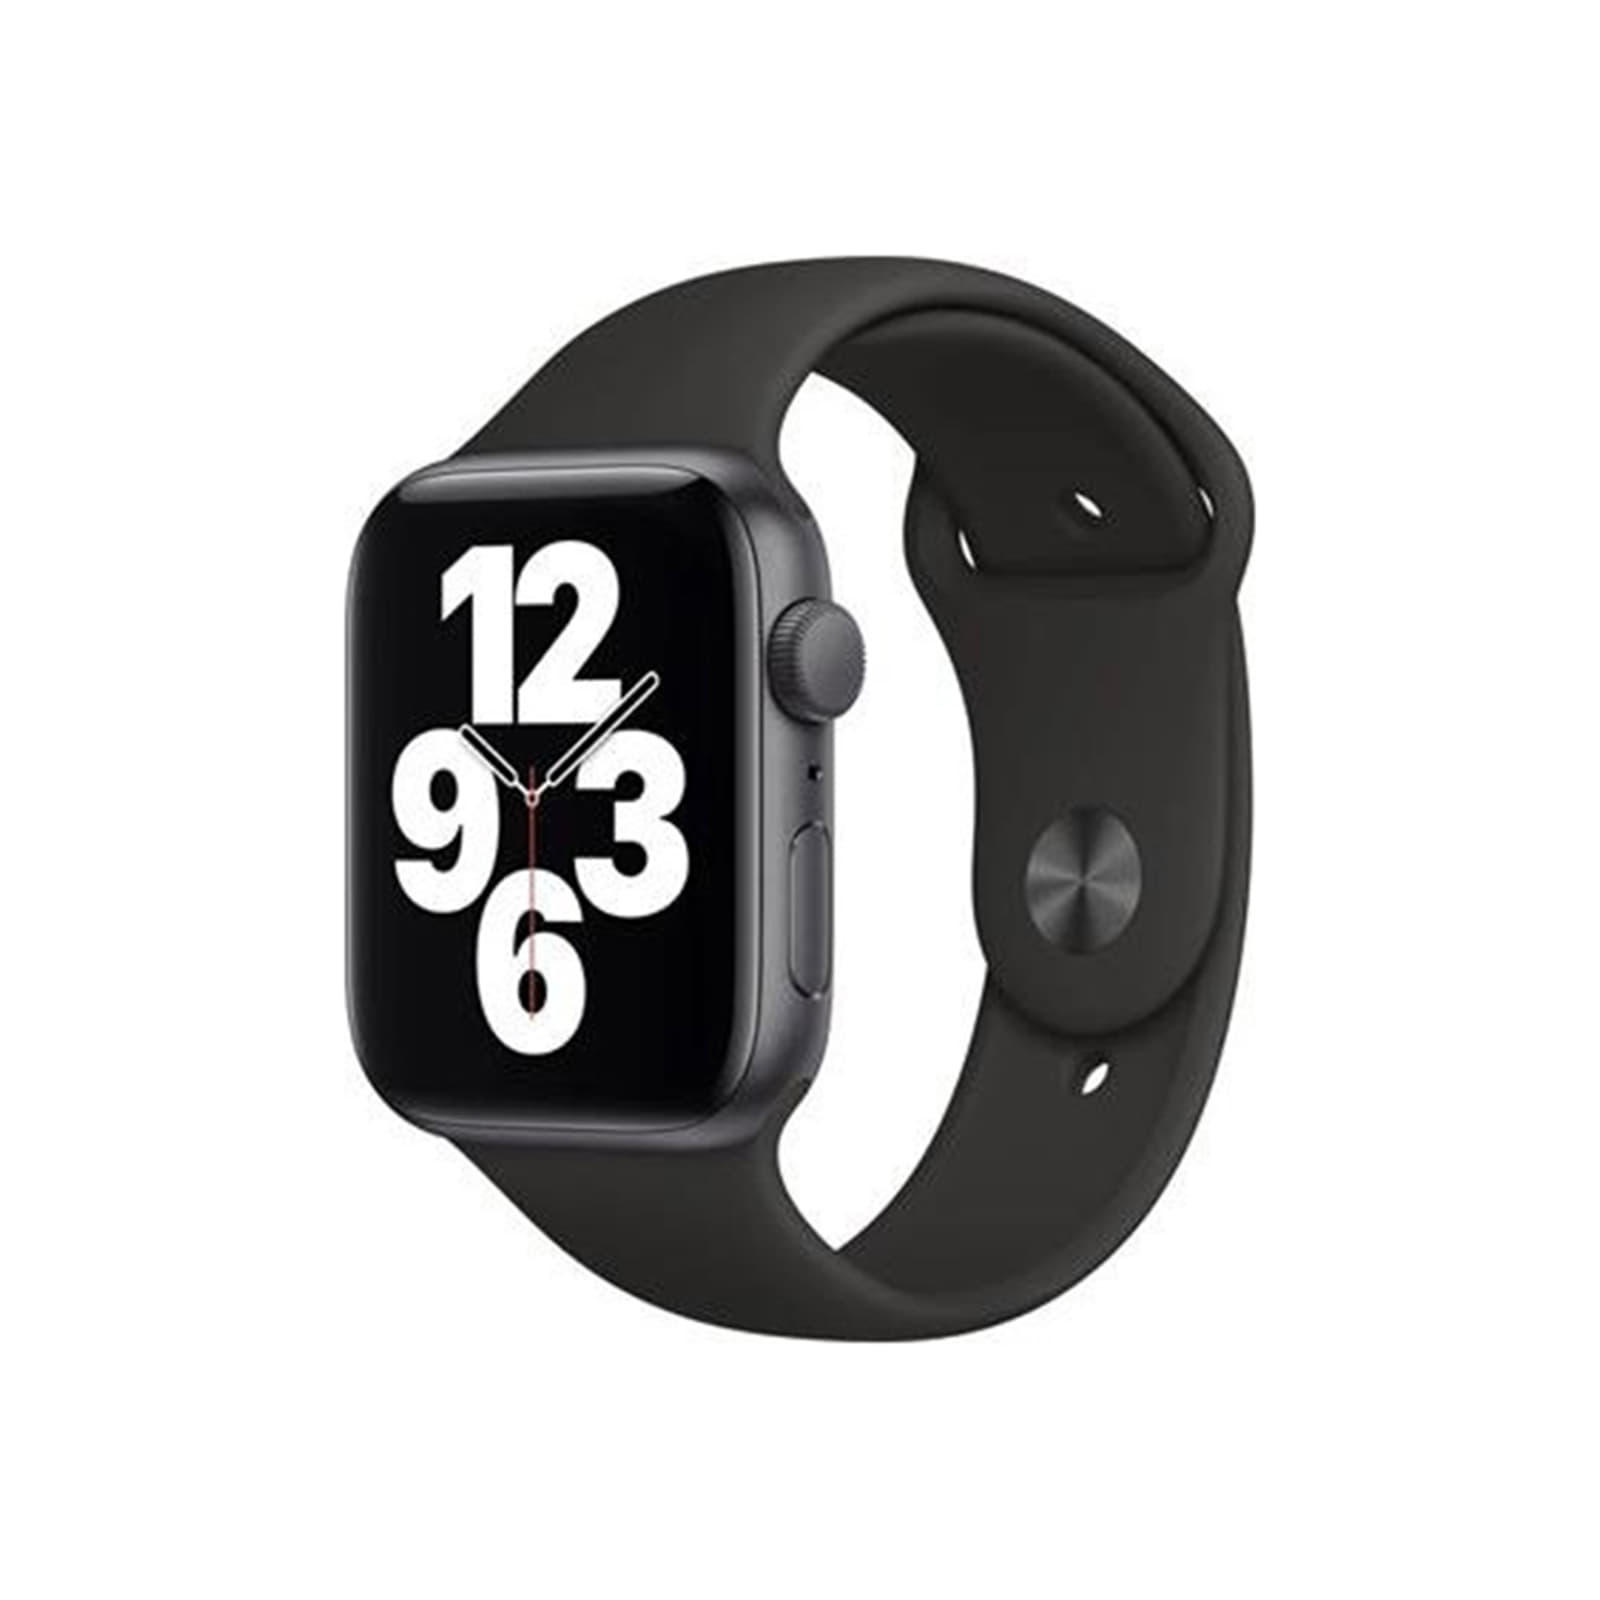 Watches Apple Watch Se 44mm Space Gray Aluminium Case With Black Sport Band Black